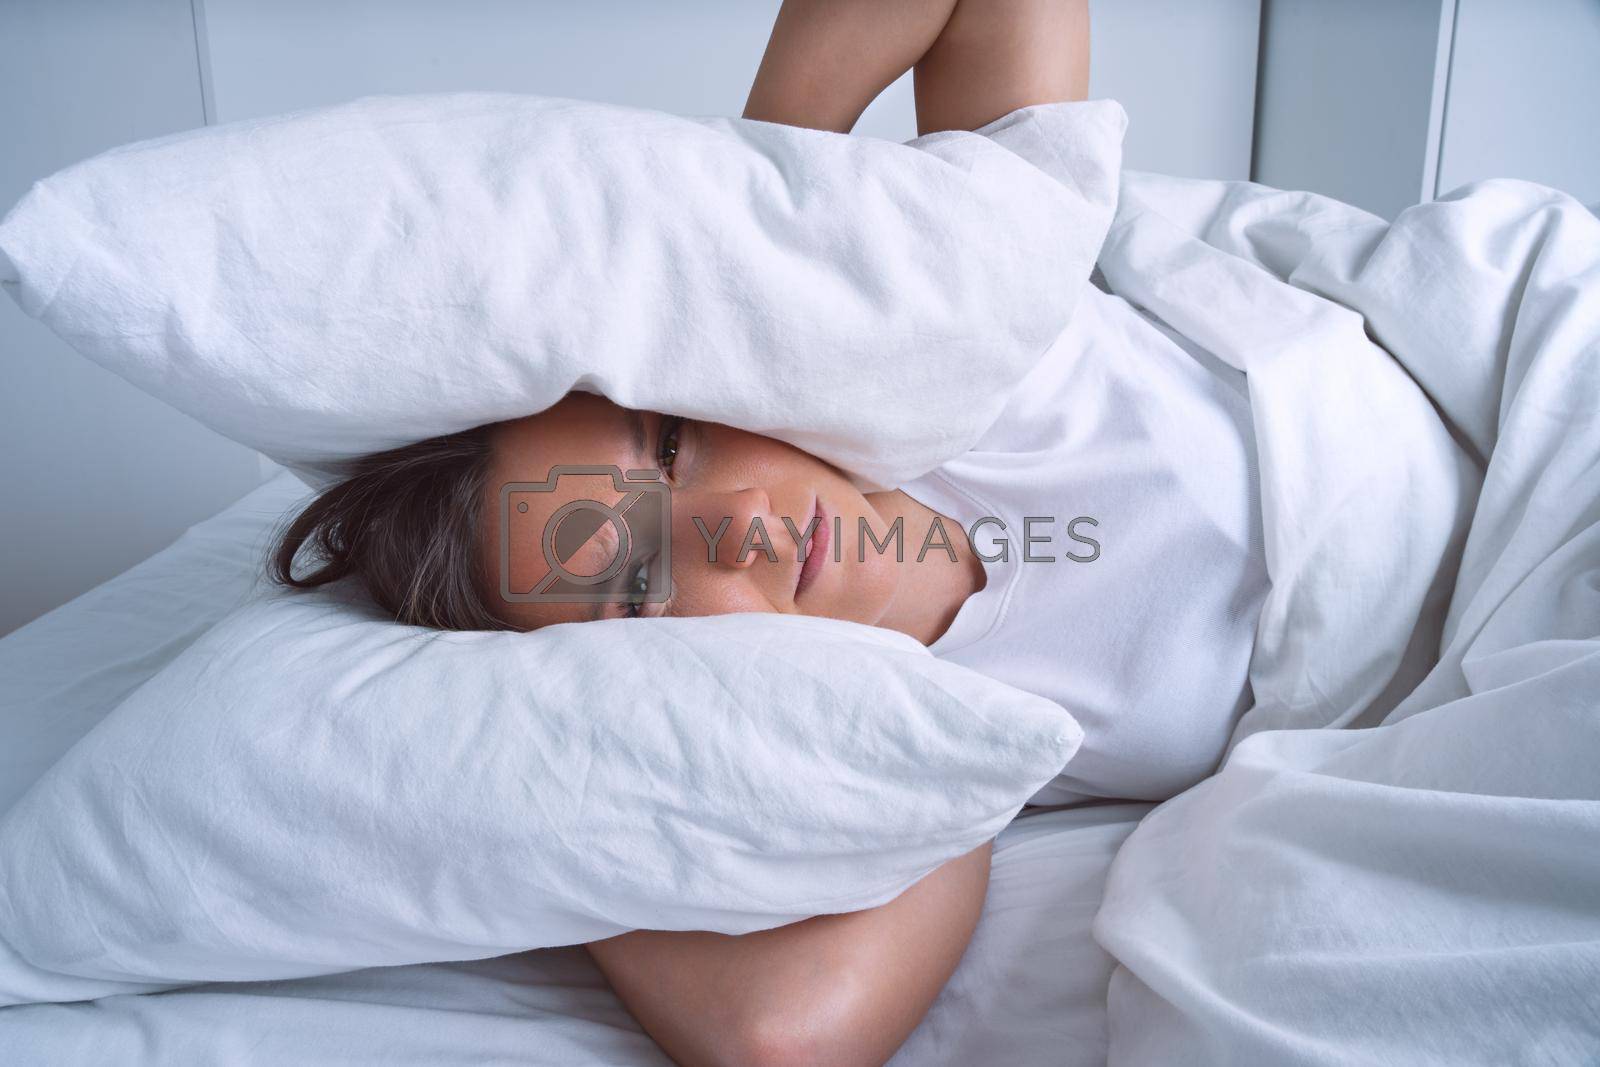 Royalty free image of Young woman can't sleep because of noisy neighbours and covering ears with pillows by DariaKulkova